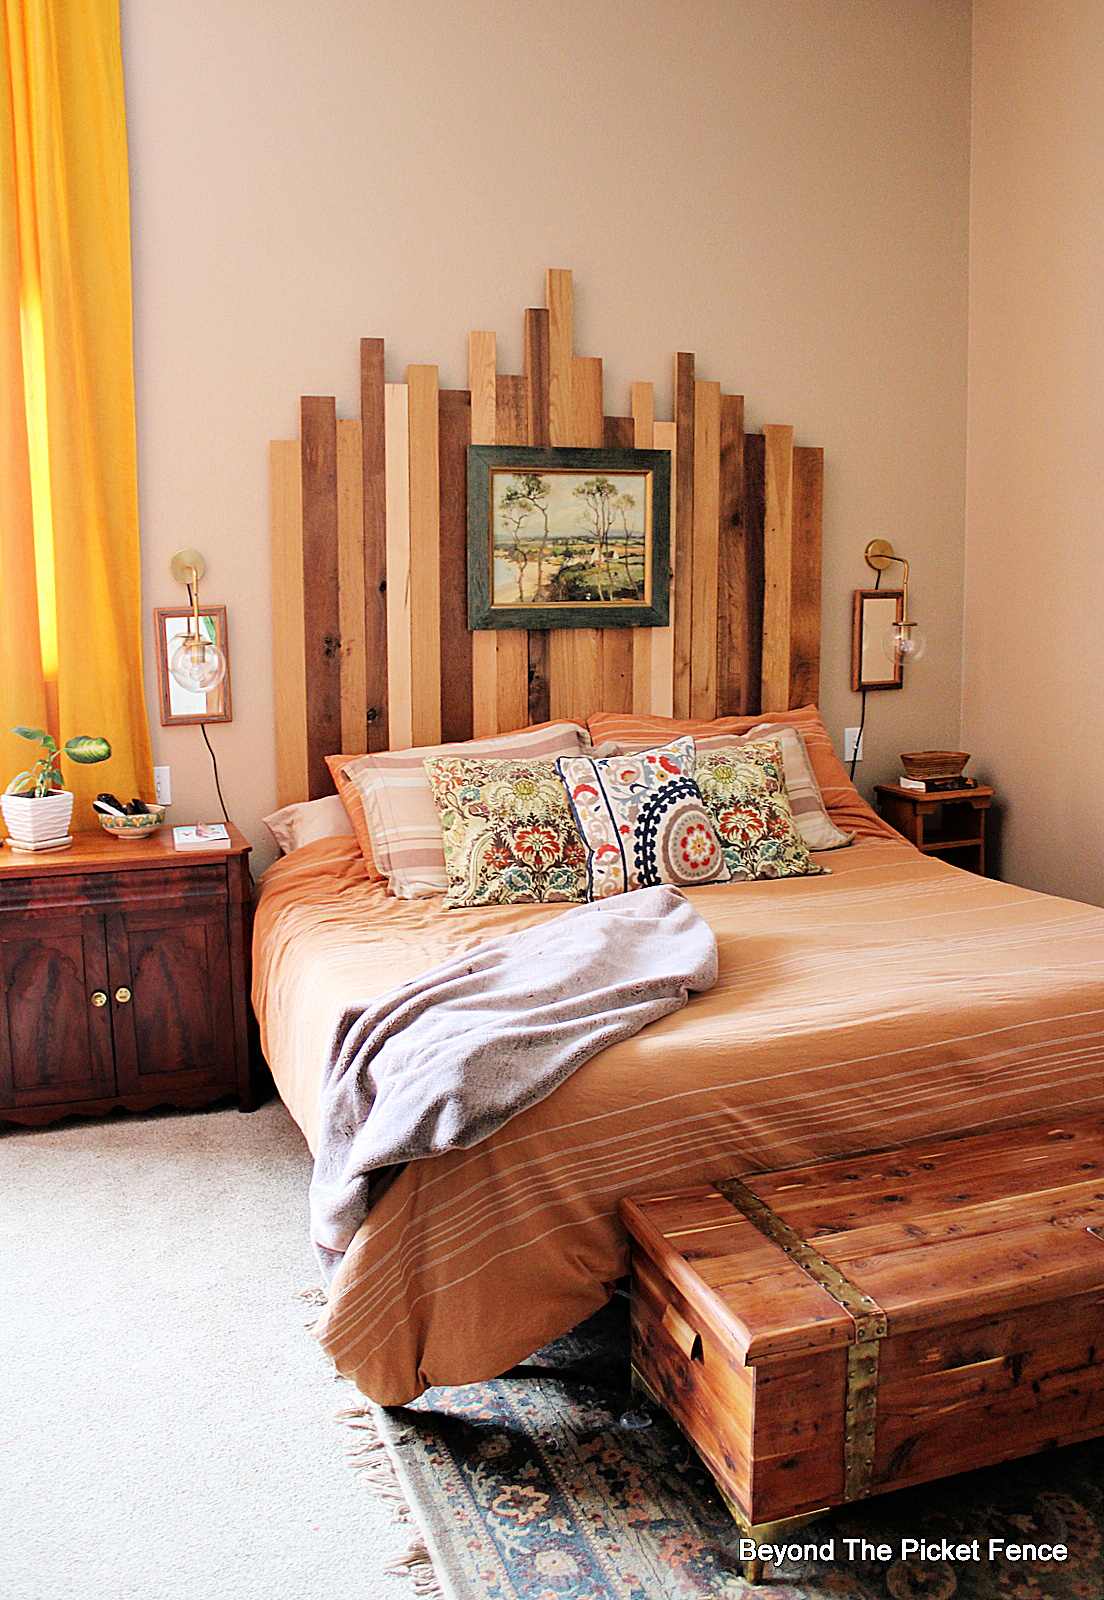 Beyond The Picket Fence: Creating a Cozy and Curated Primary Bedroom